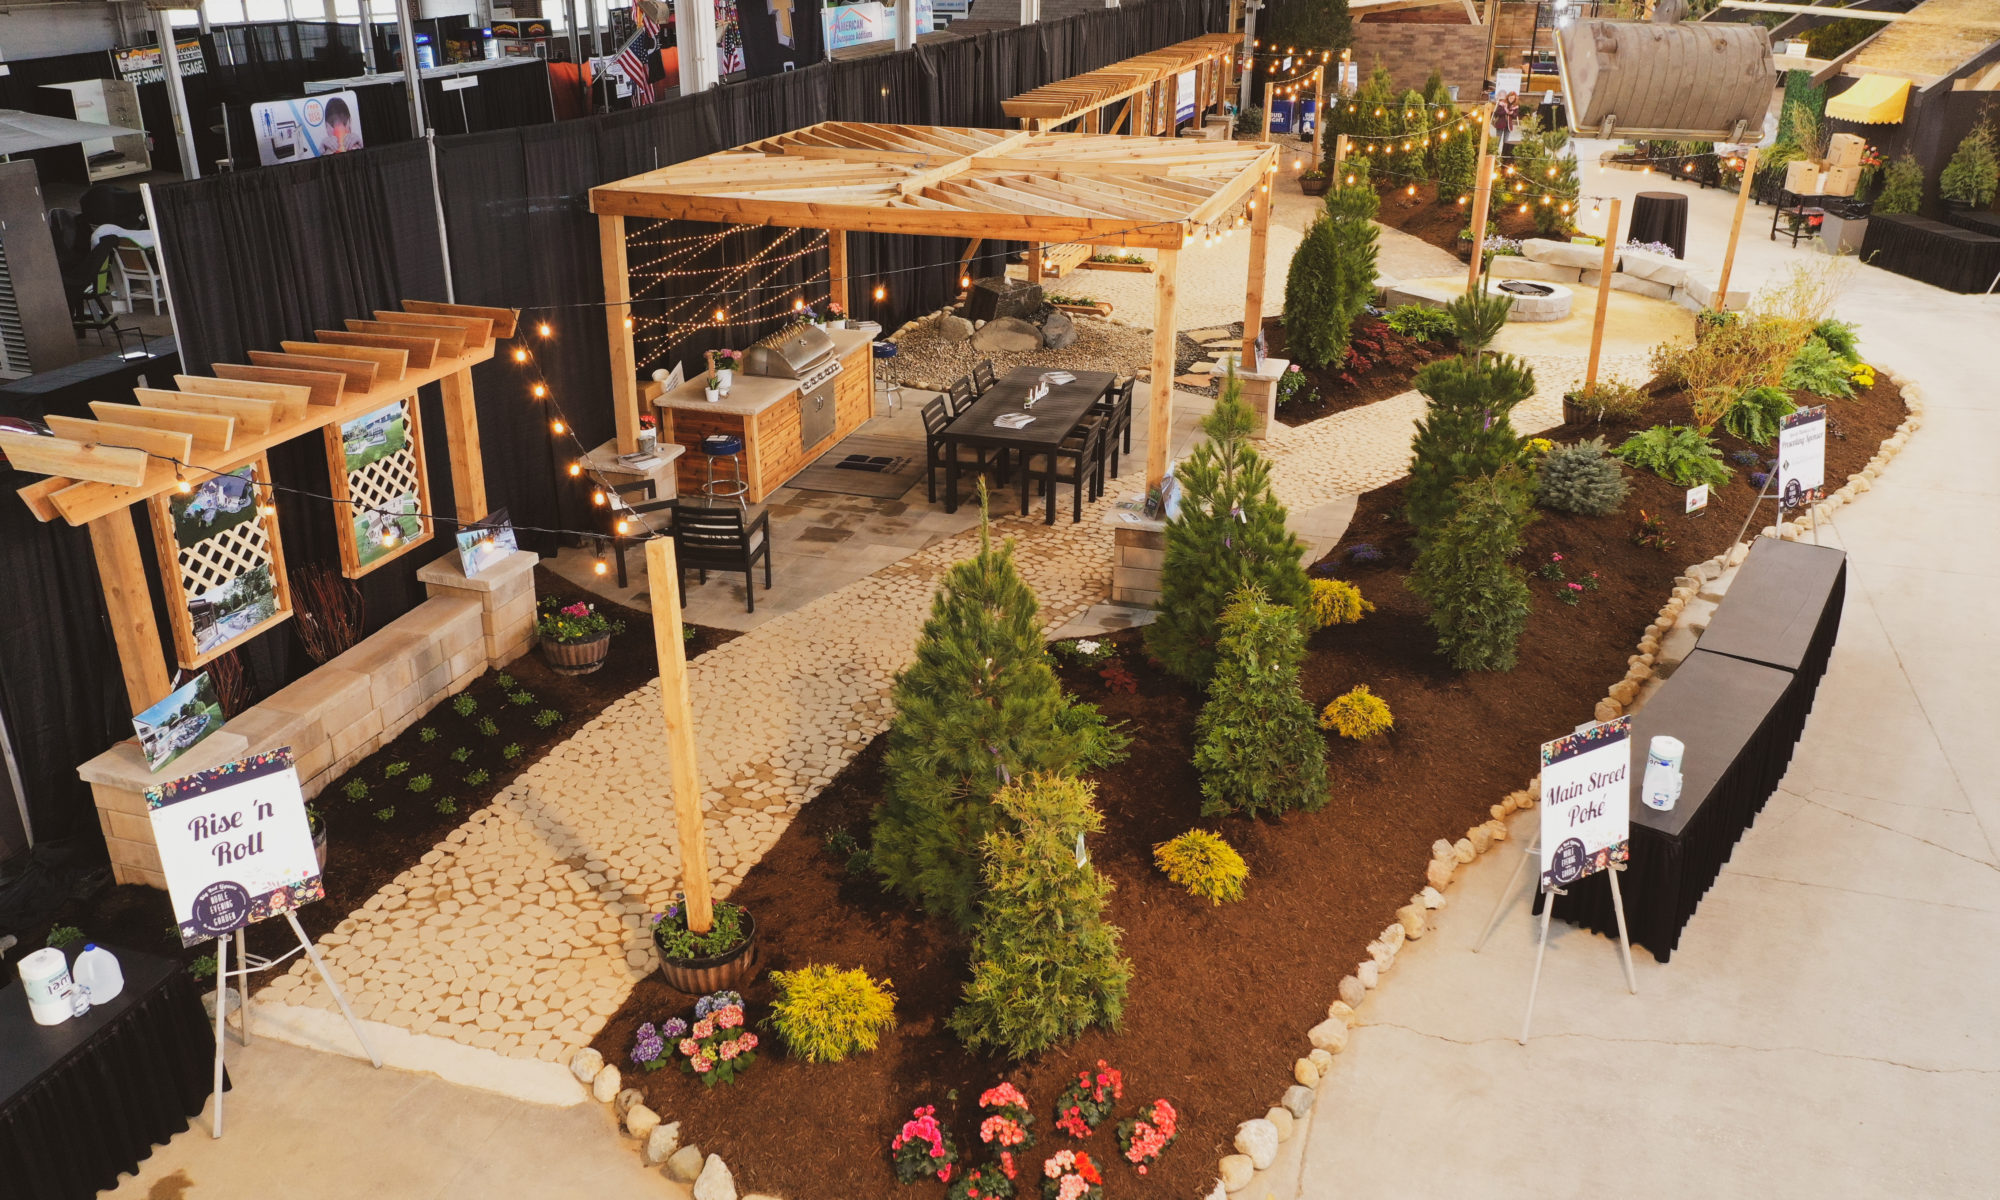 indiana indianapolis flower and patio show 2022 pergola firepit swing swings lighting landscaping